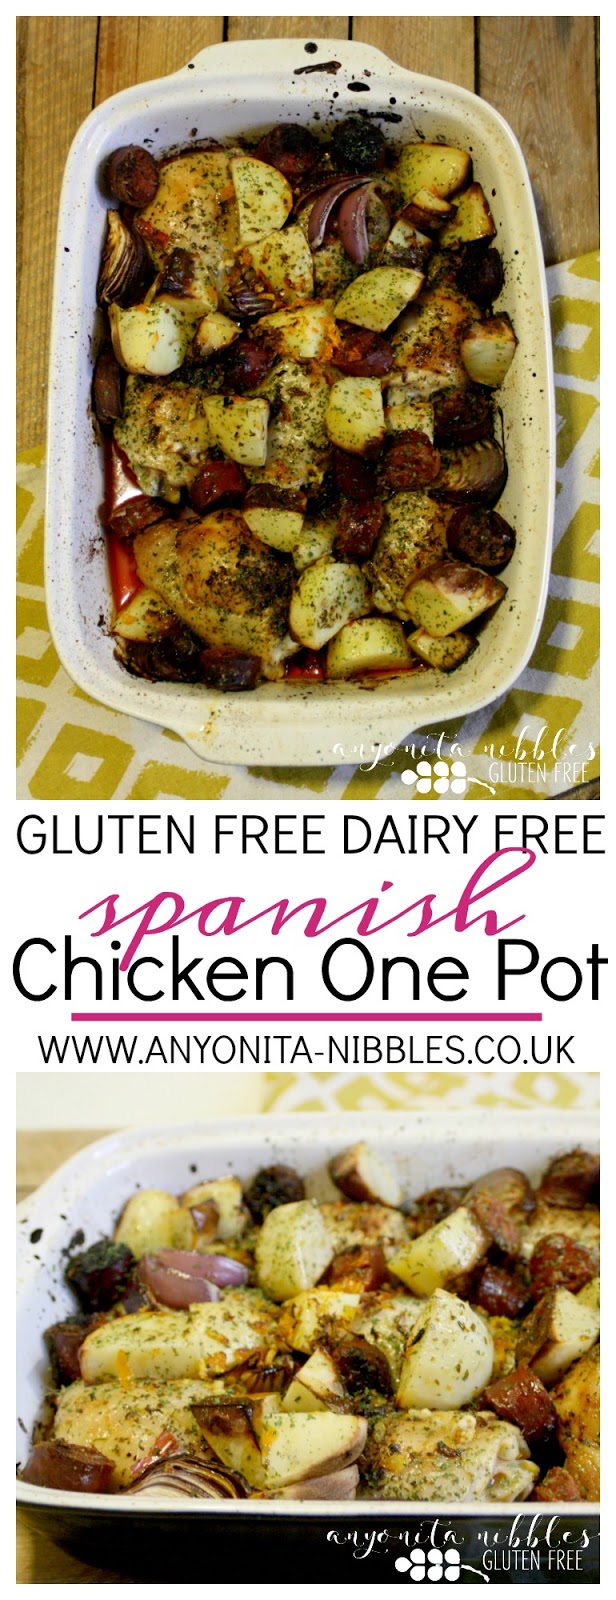 Gluten Free Dairy Free Spanish Chicken One Pot by Anyonita-Nibbles.co.uk